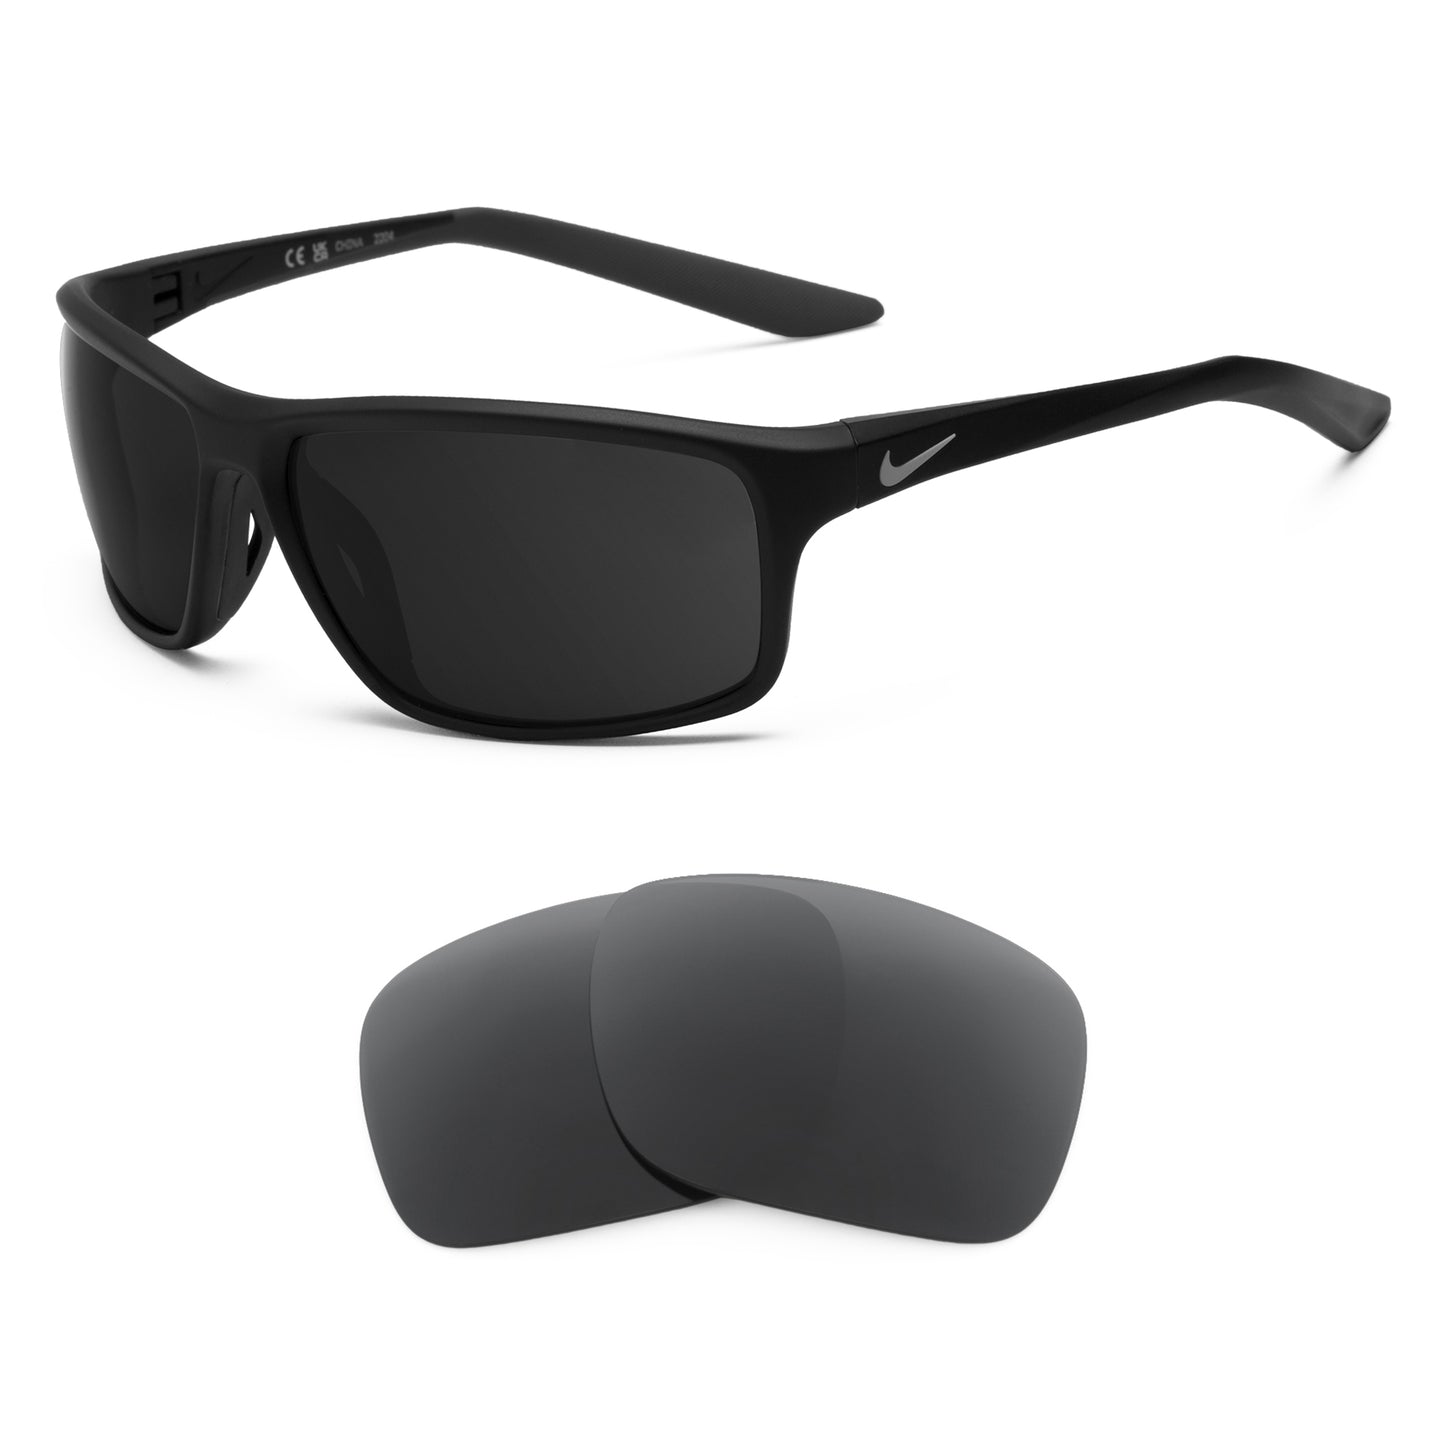 Nike Adrenaline 22 sunglasses with replacement lenses